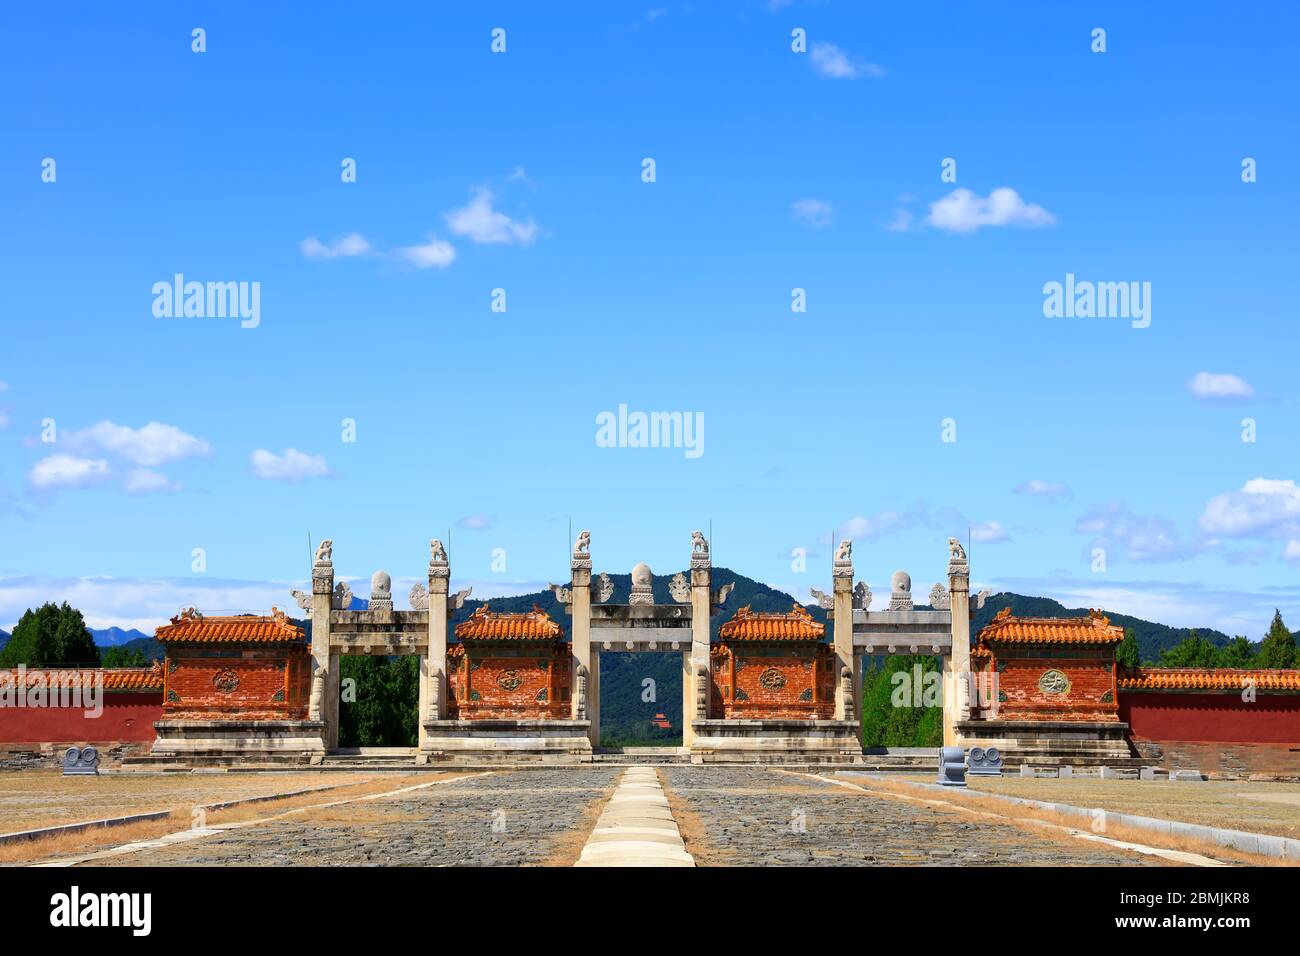 Ancient Chinese architecture stone arch Stock Photo